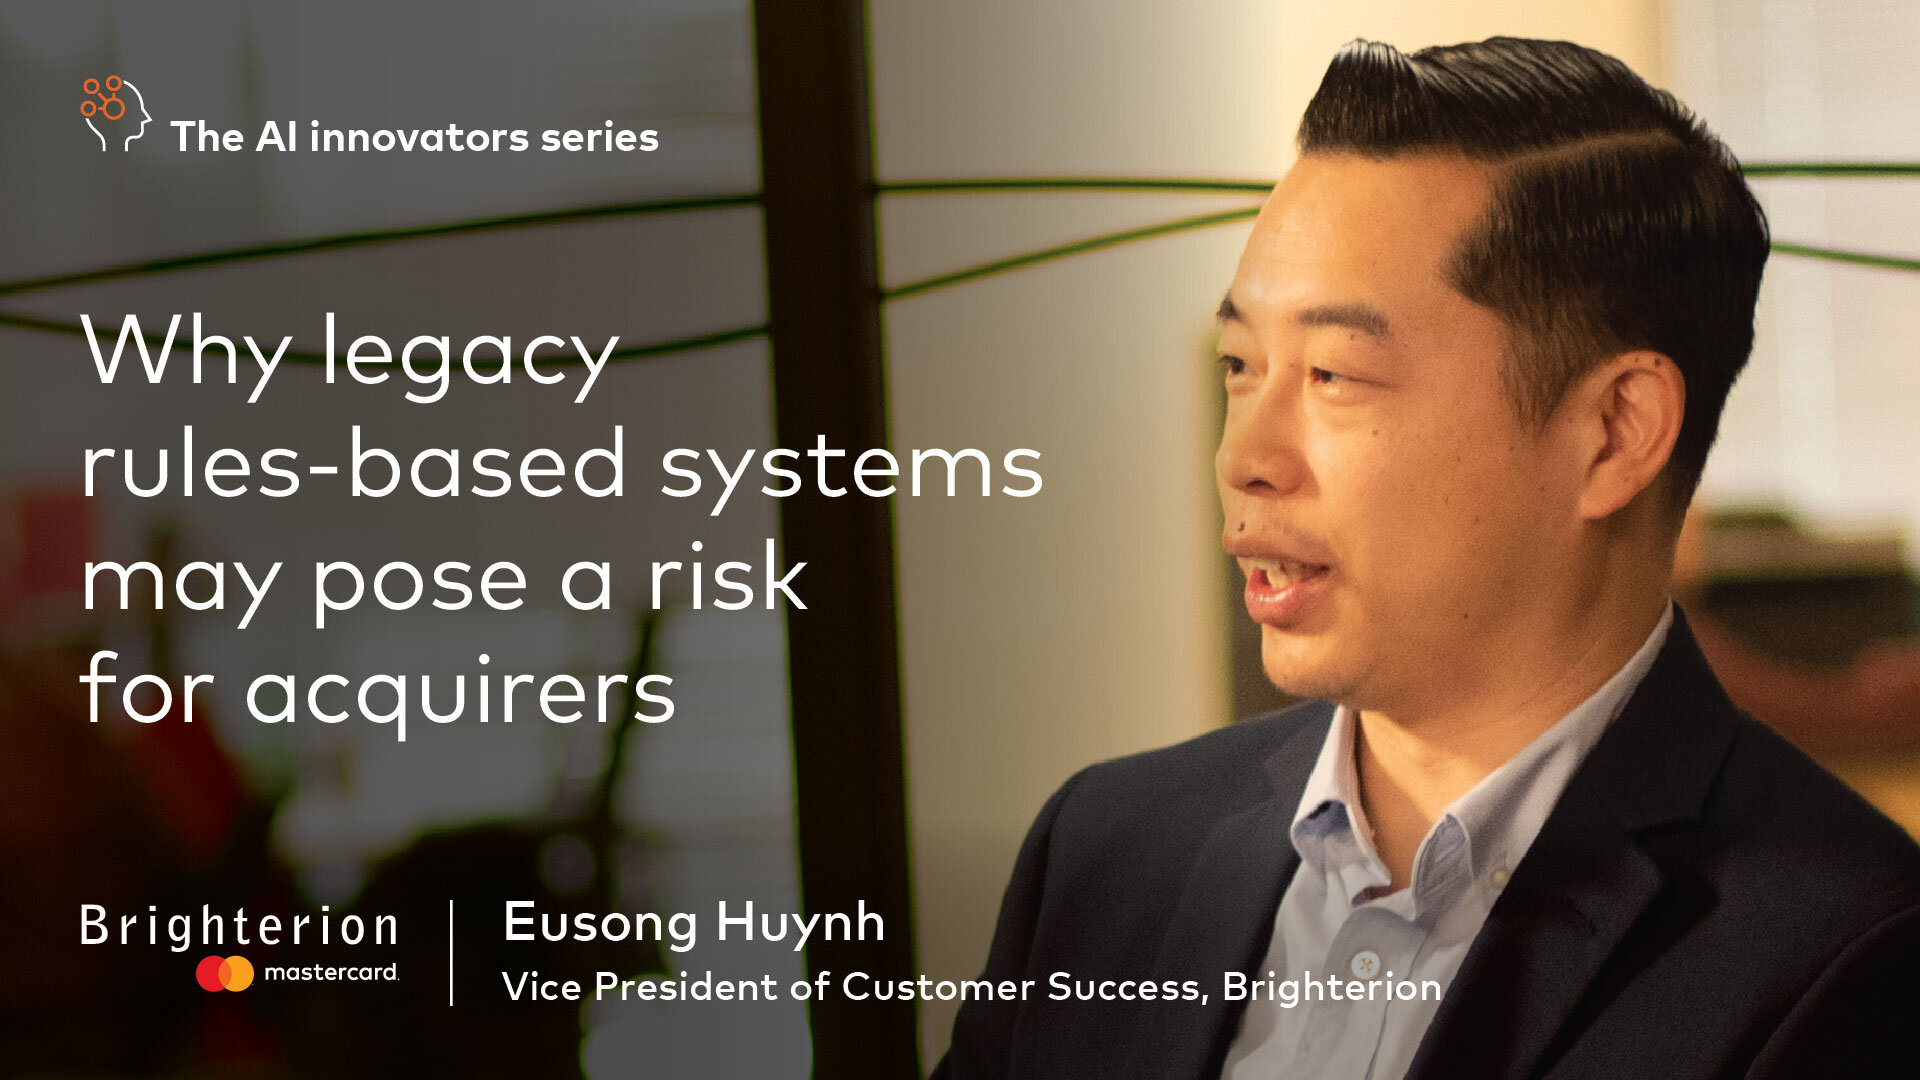 Why legacy rules-based systems may pose a risk for acquirers